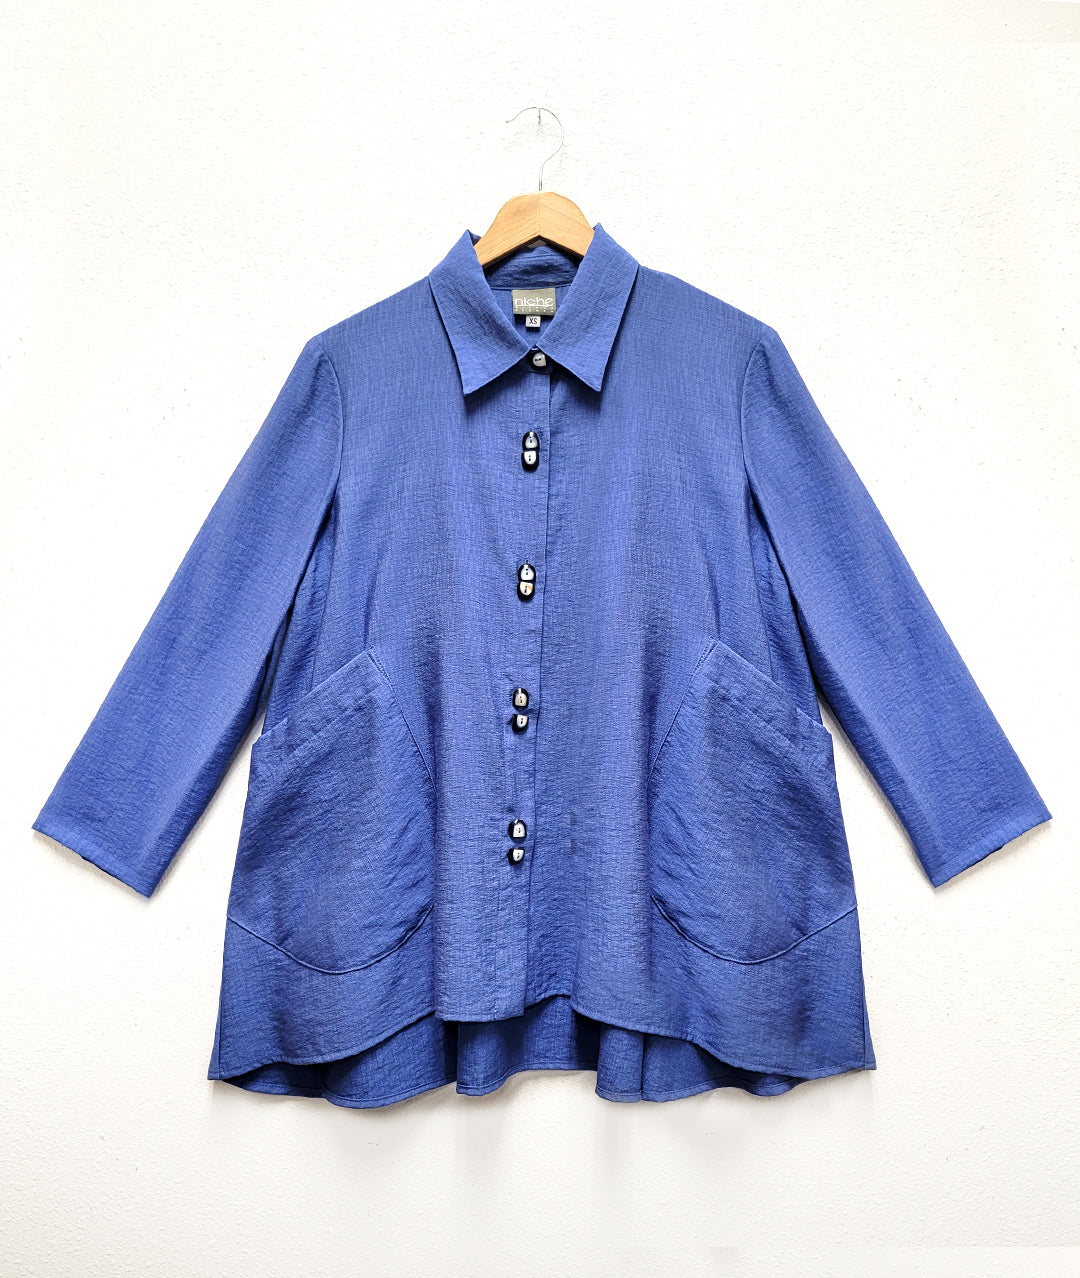 swingy periwinkle color button down blouse with large hip pockets